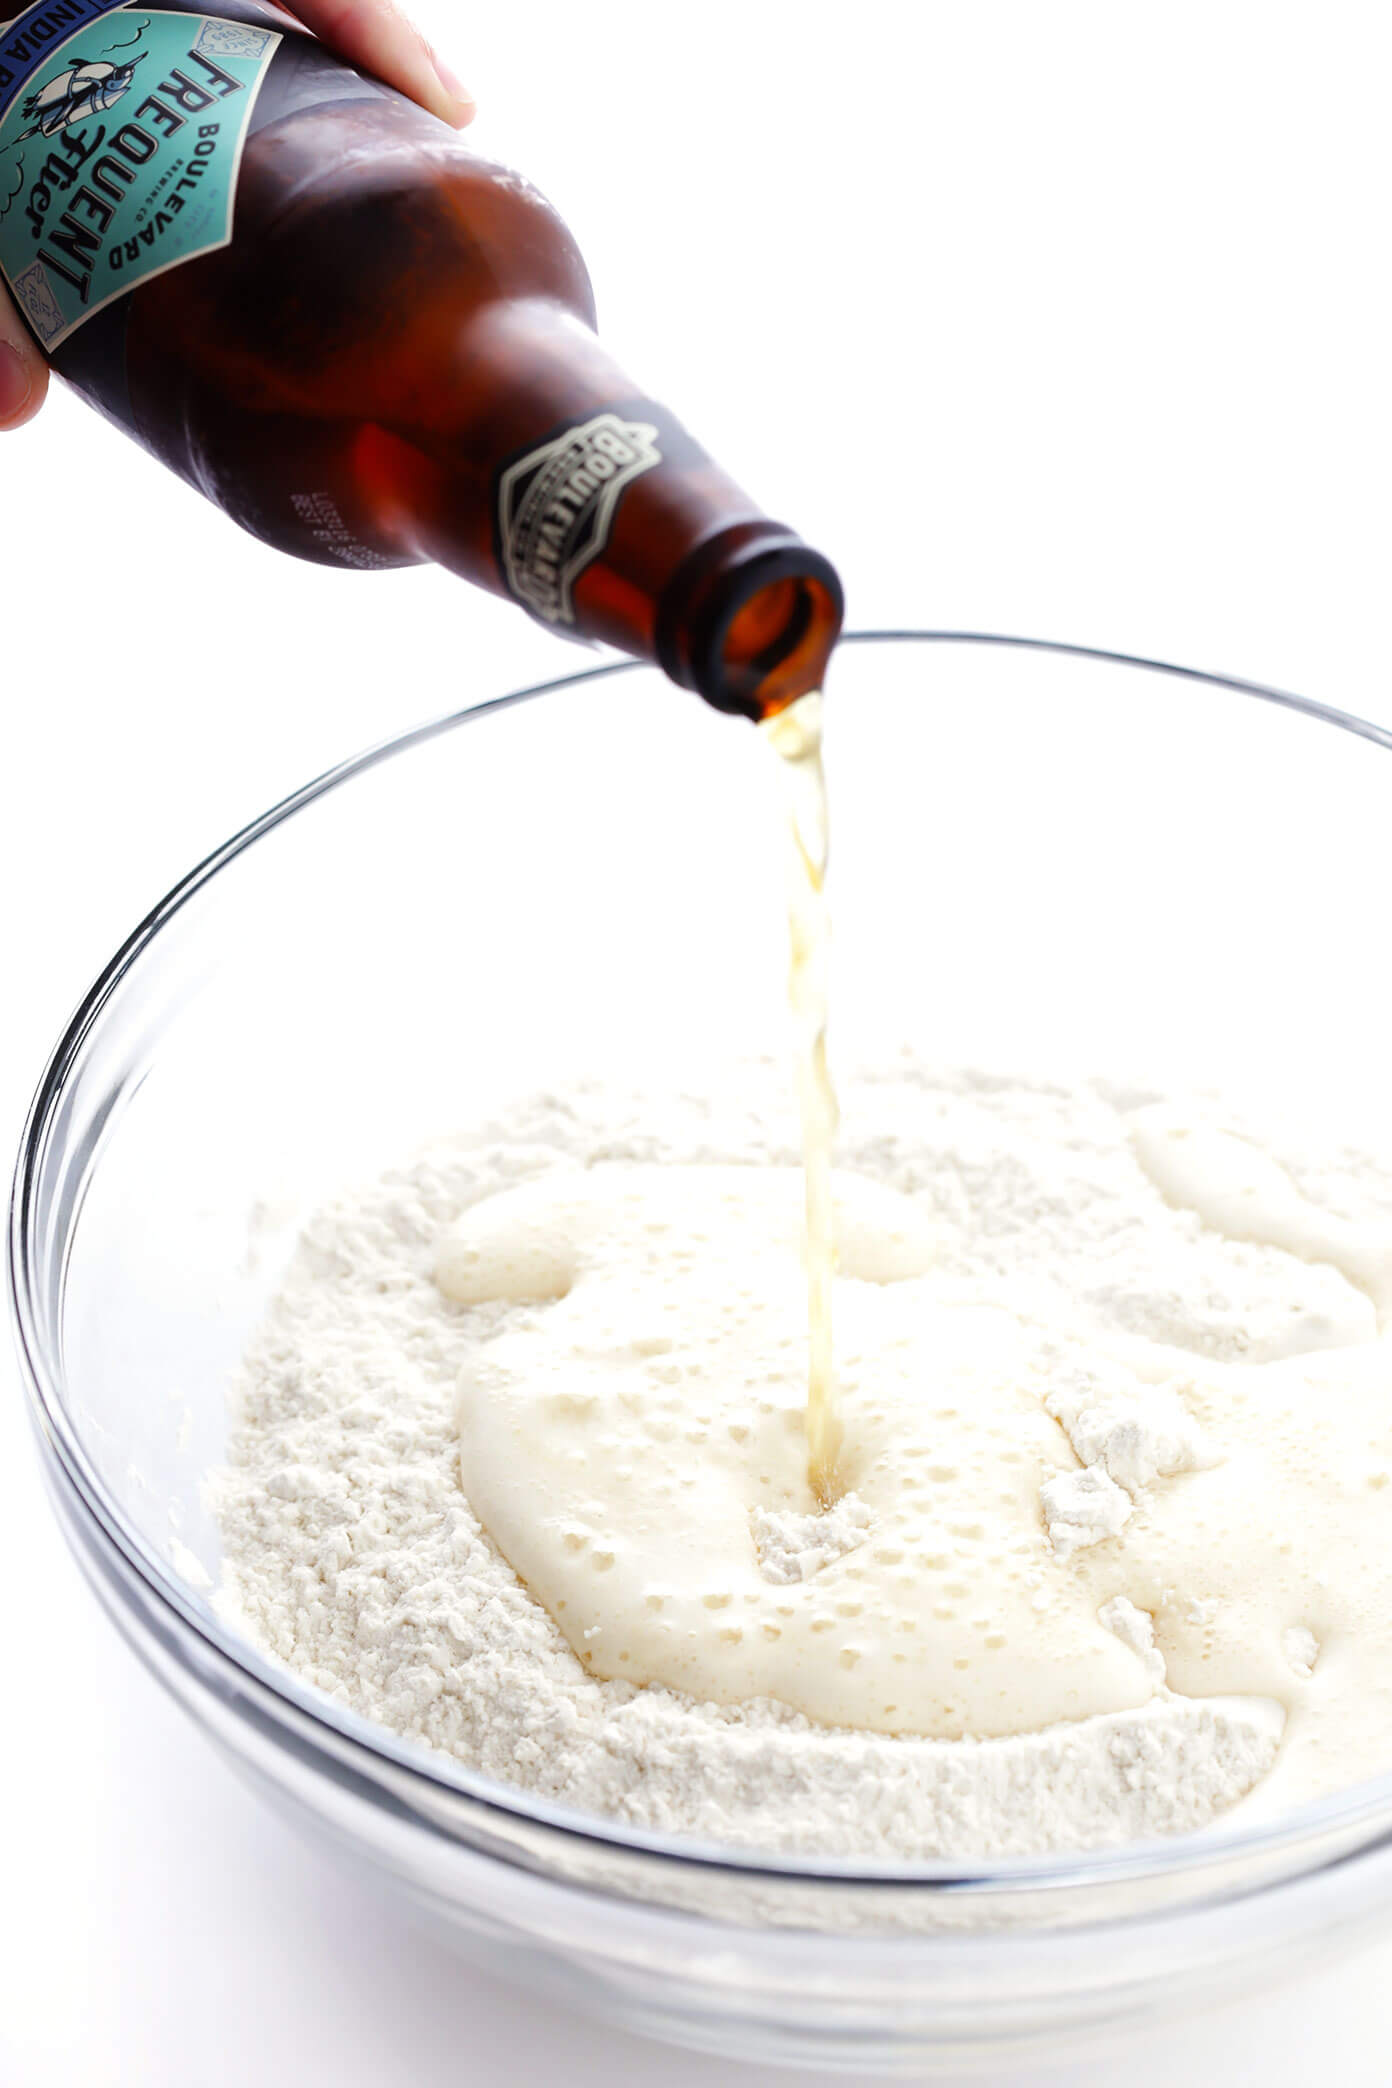 How To Make Beer Bread